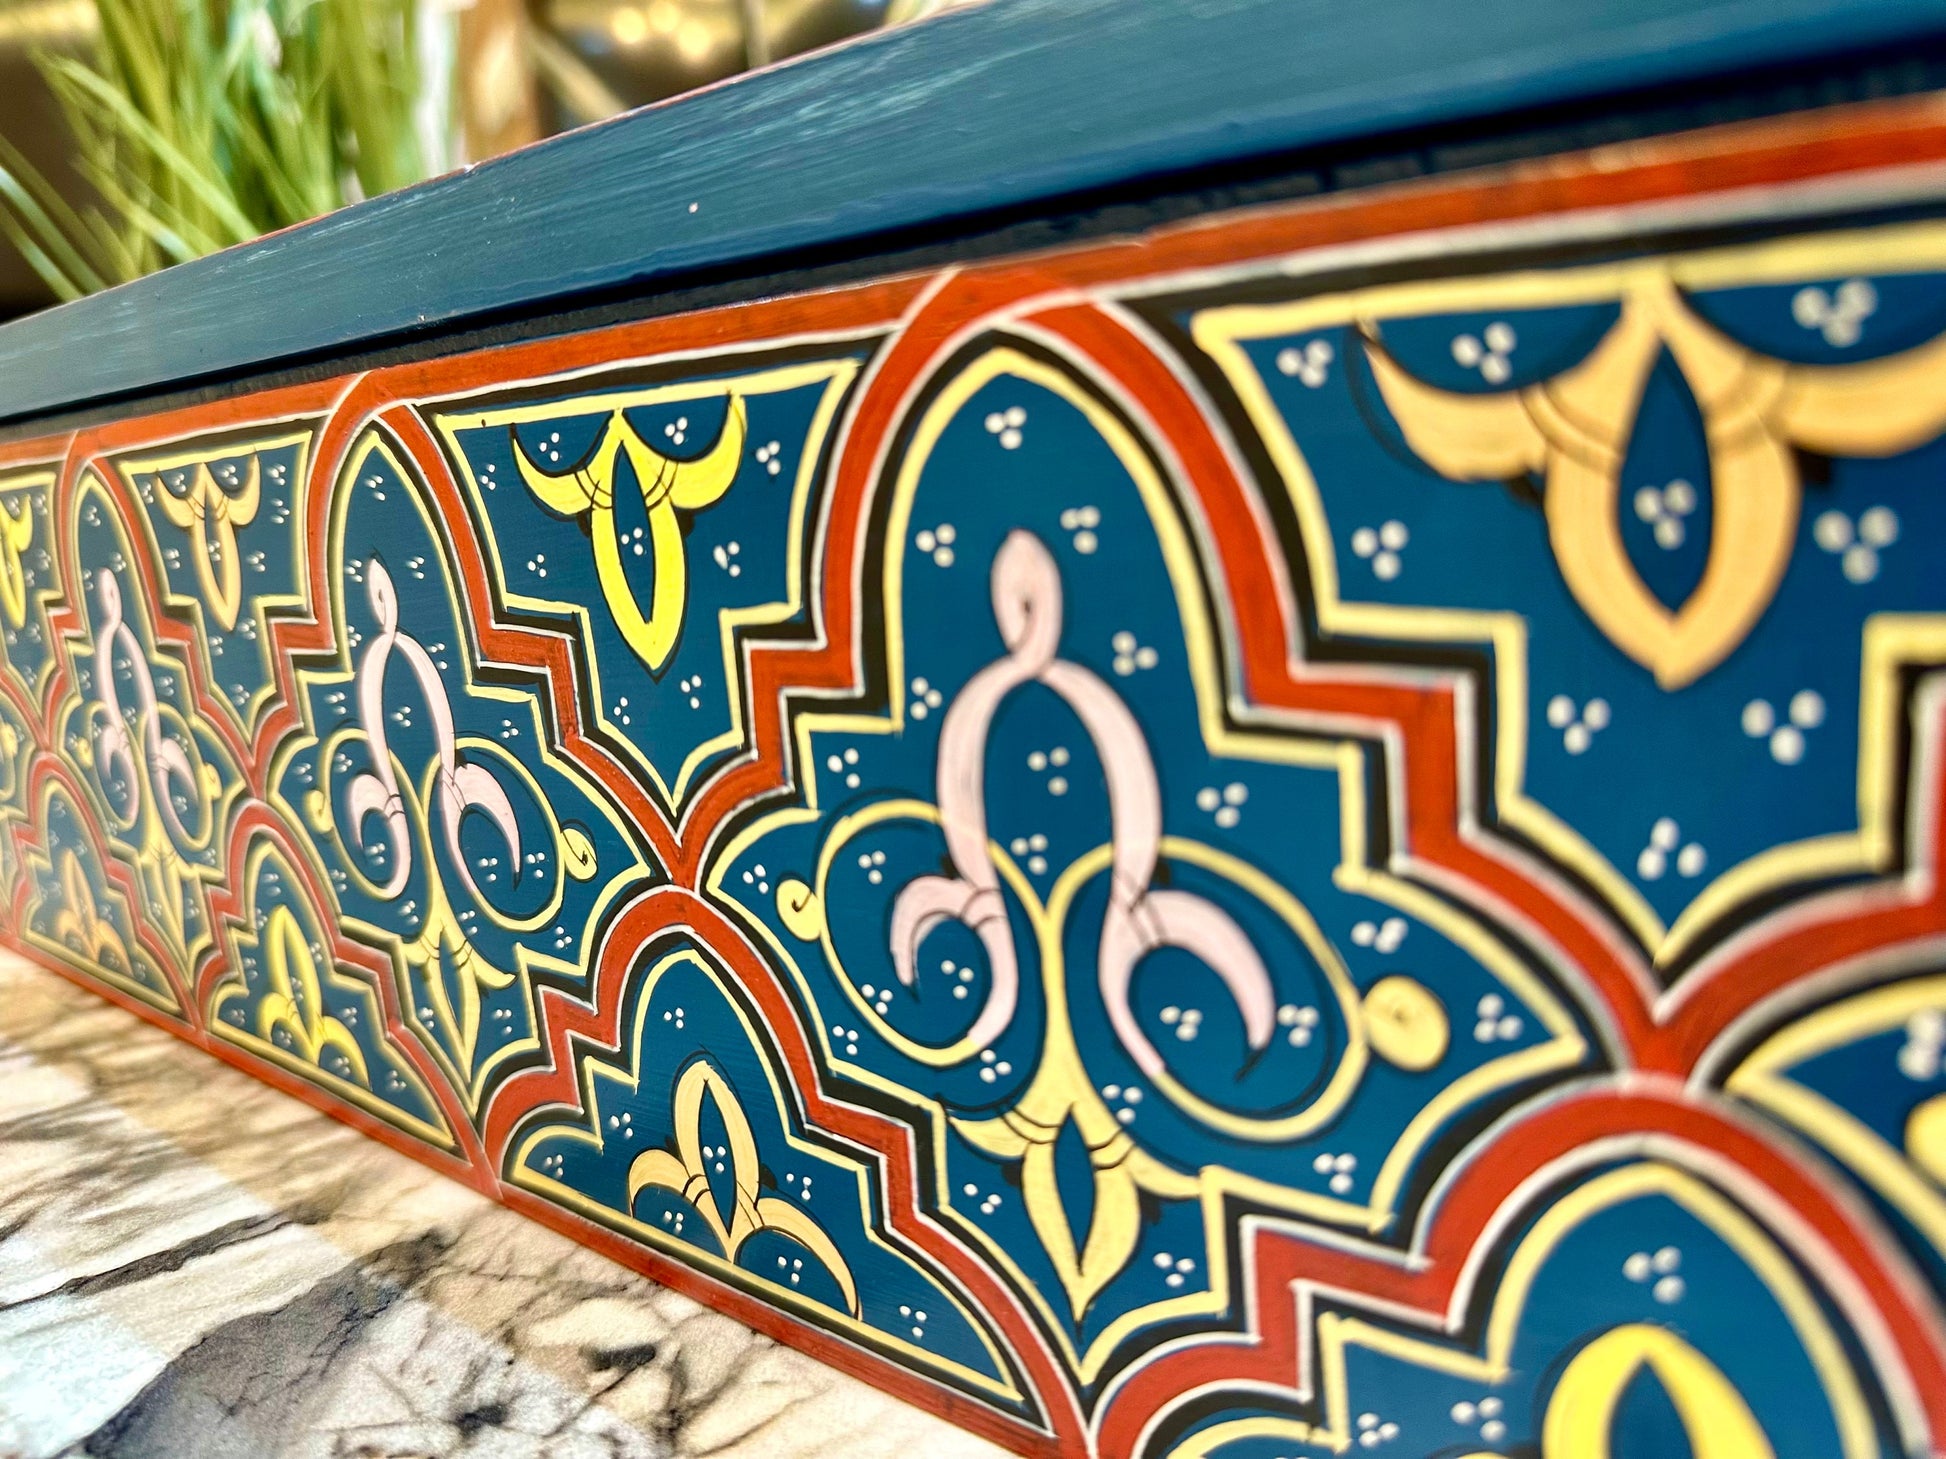 23"x7" Large Moroccan Hand-Painted Wood Box with Floral Motifs,Wood Storage jewellery Box,Boho Home Ethnic Decor,gift wood box